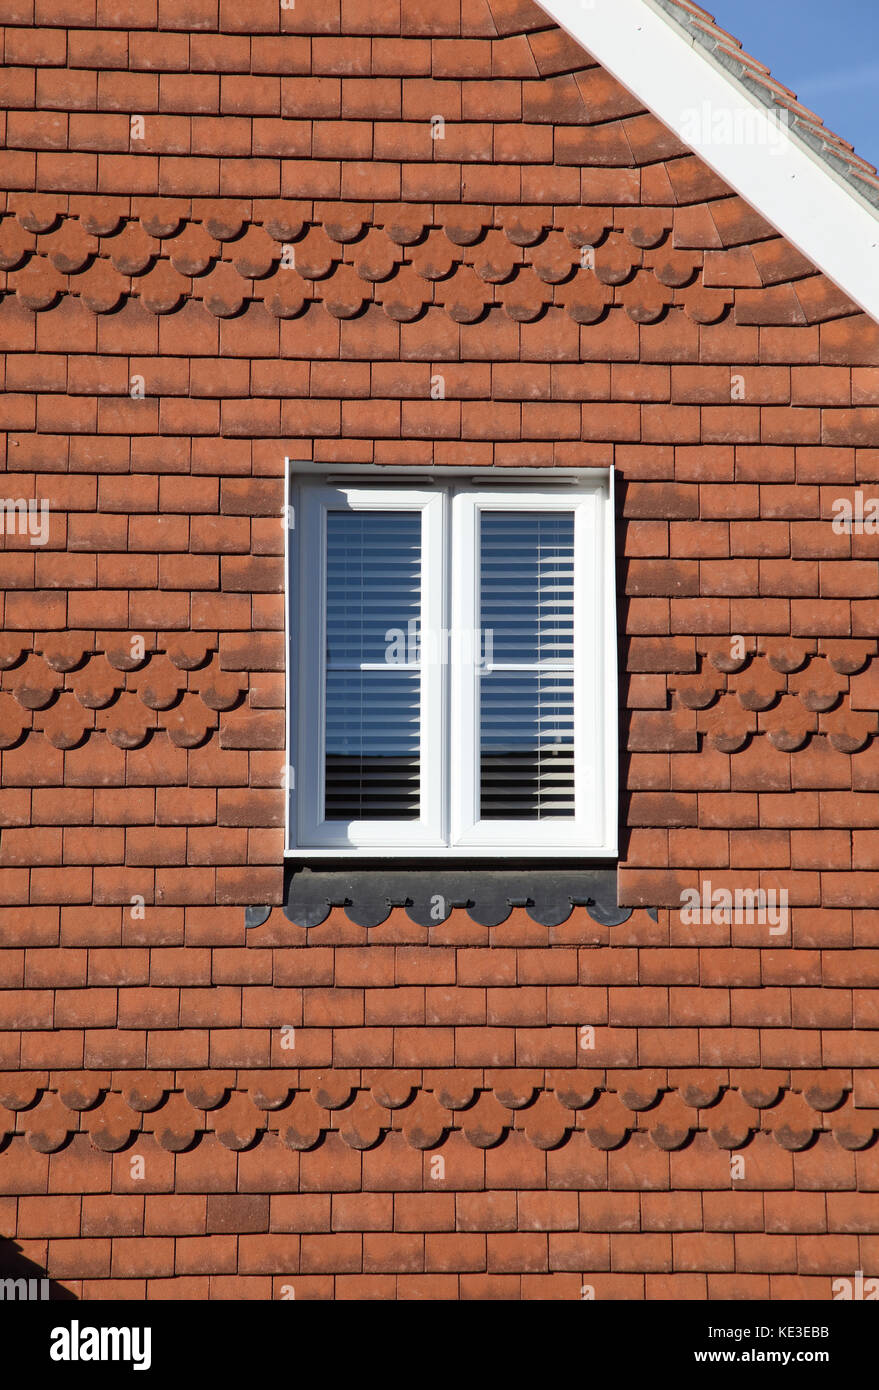 close up of traditional clay tiles on the exterior wall of a newly ...